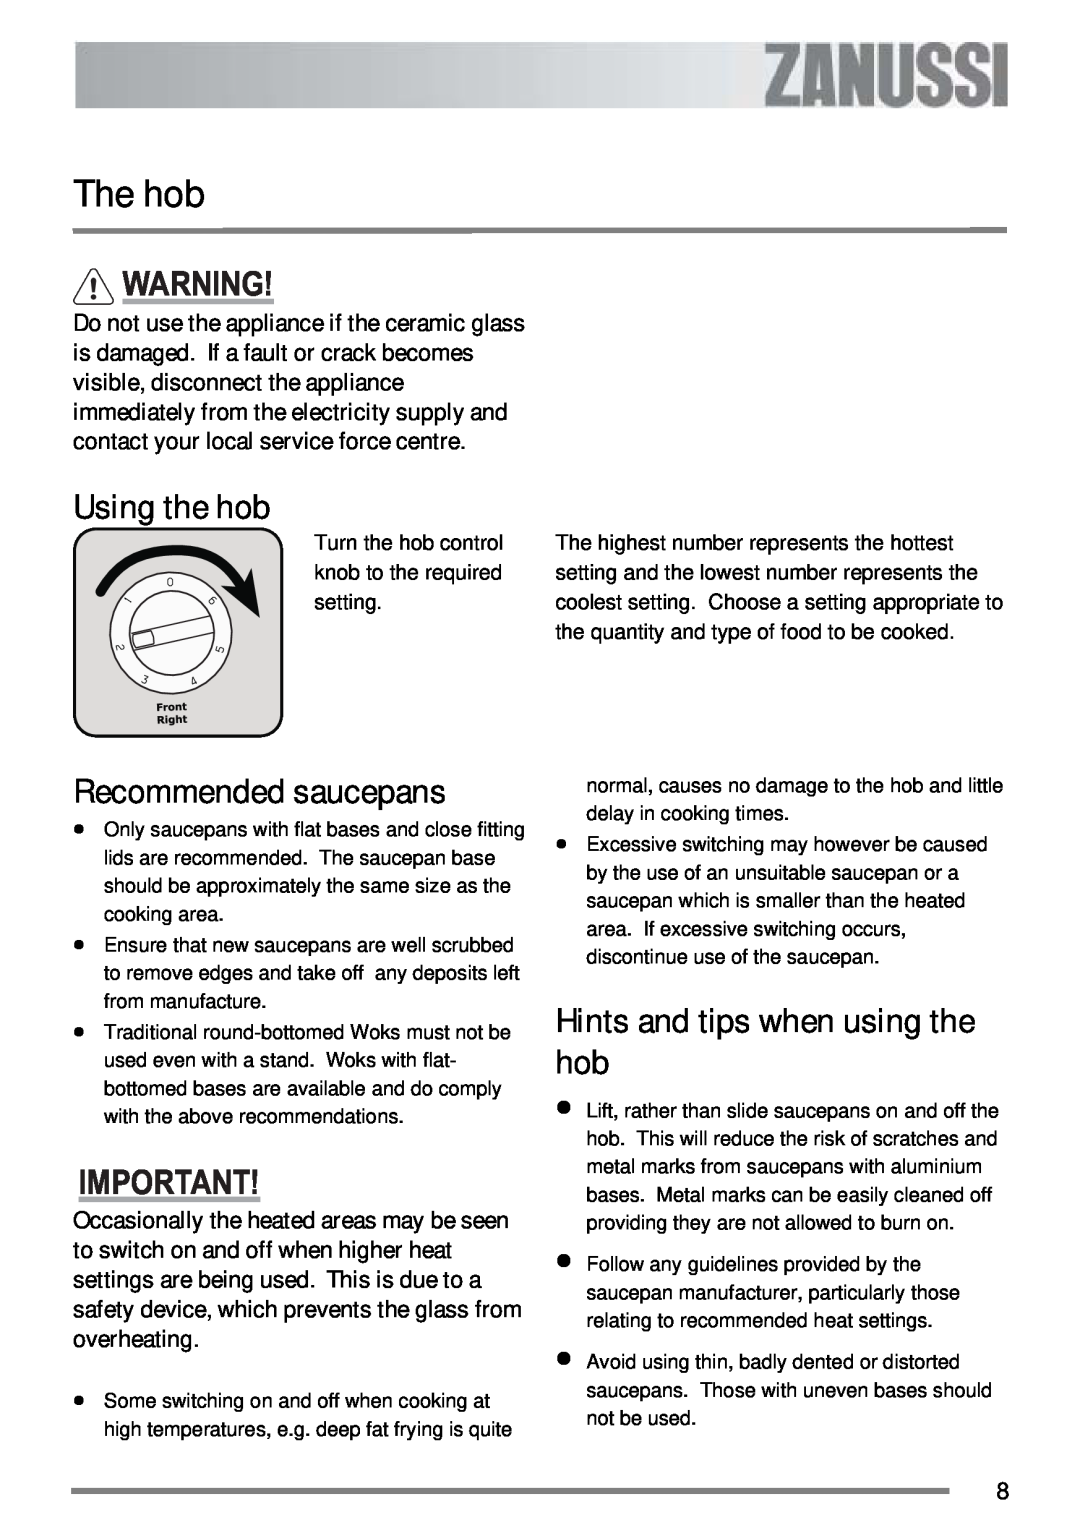 Zanussi ZKC 6000W user manual The hob, Using the hob, Recommended saucepans, Hints and tips when using the hob 